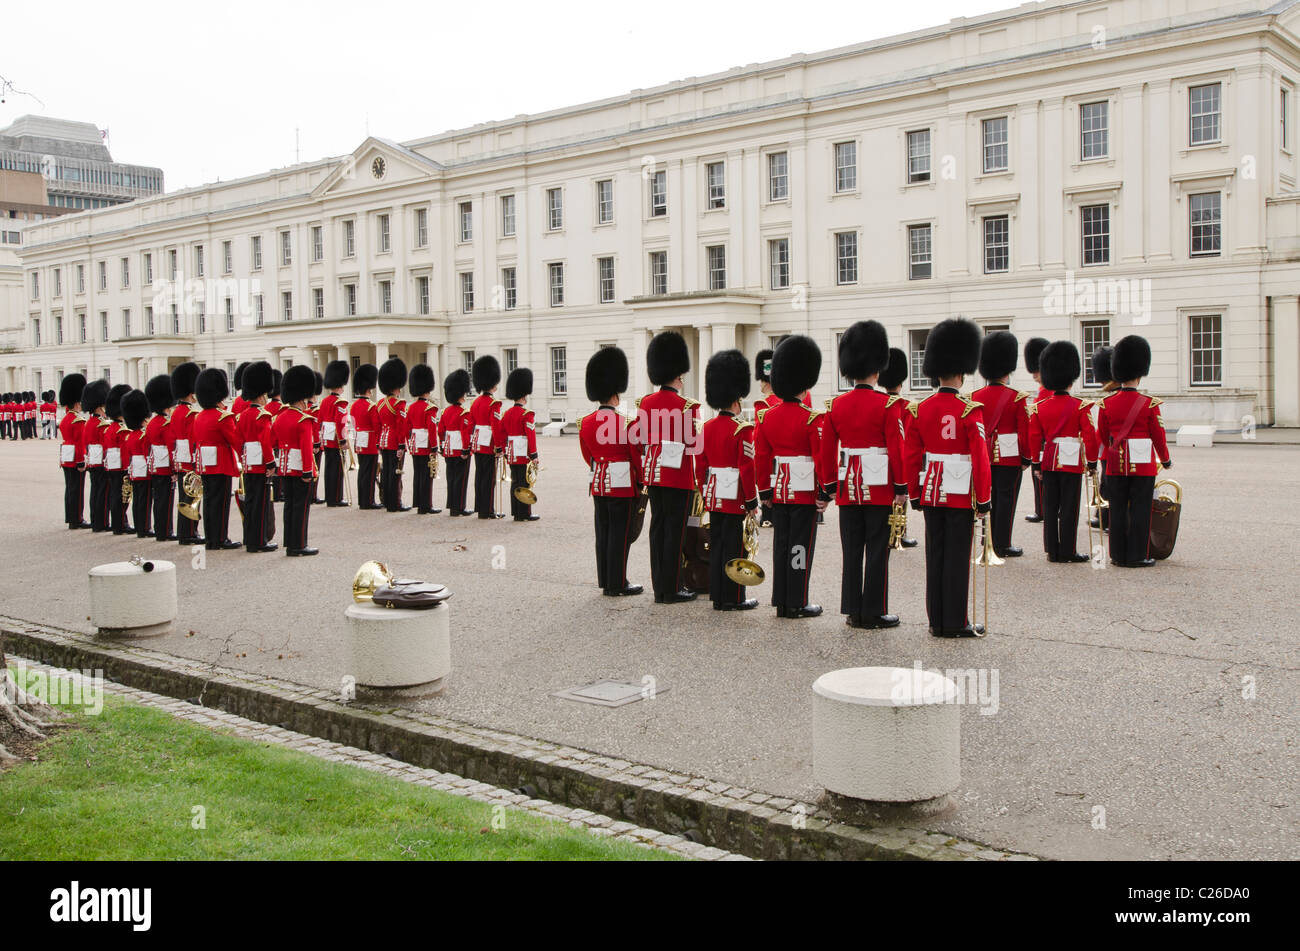 Inspection of the band of the Welsh Guards,  Wellington Barracks,  Birdcage Walk , Westminster, London Uk. Stock Photo